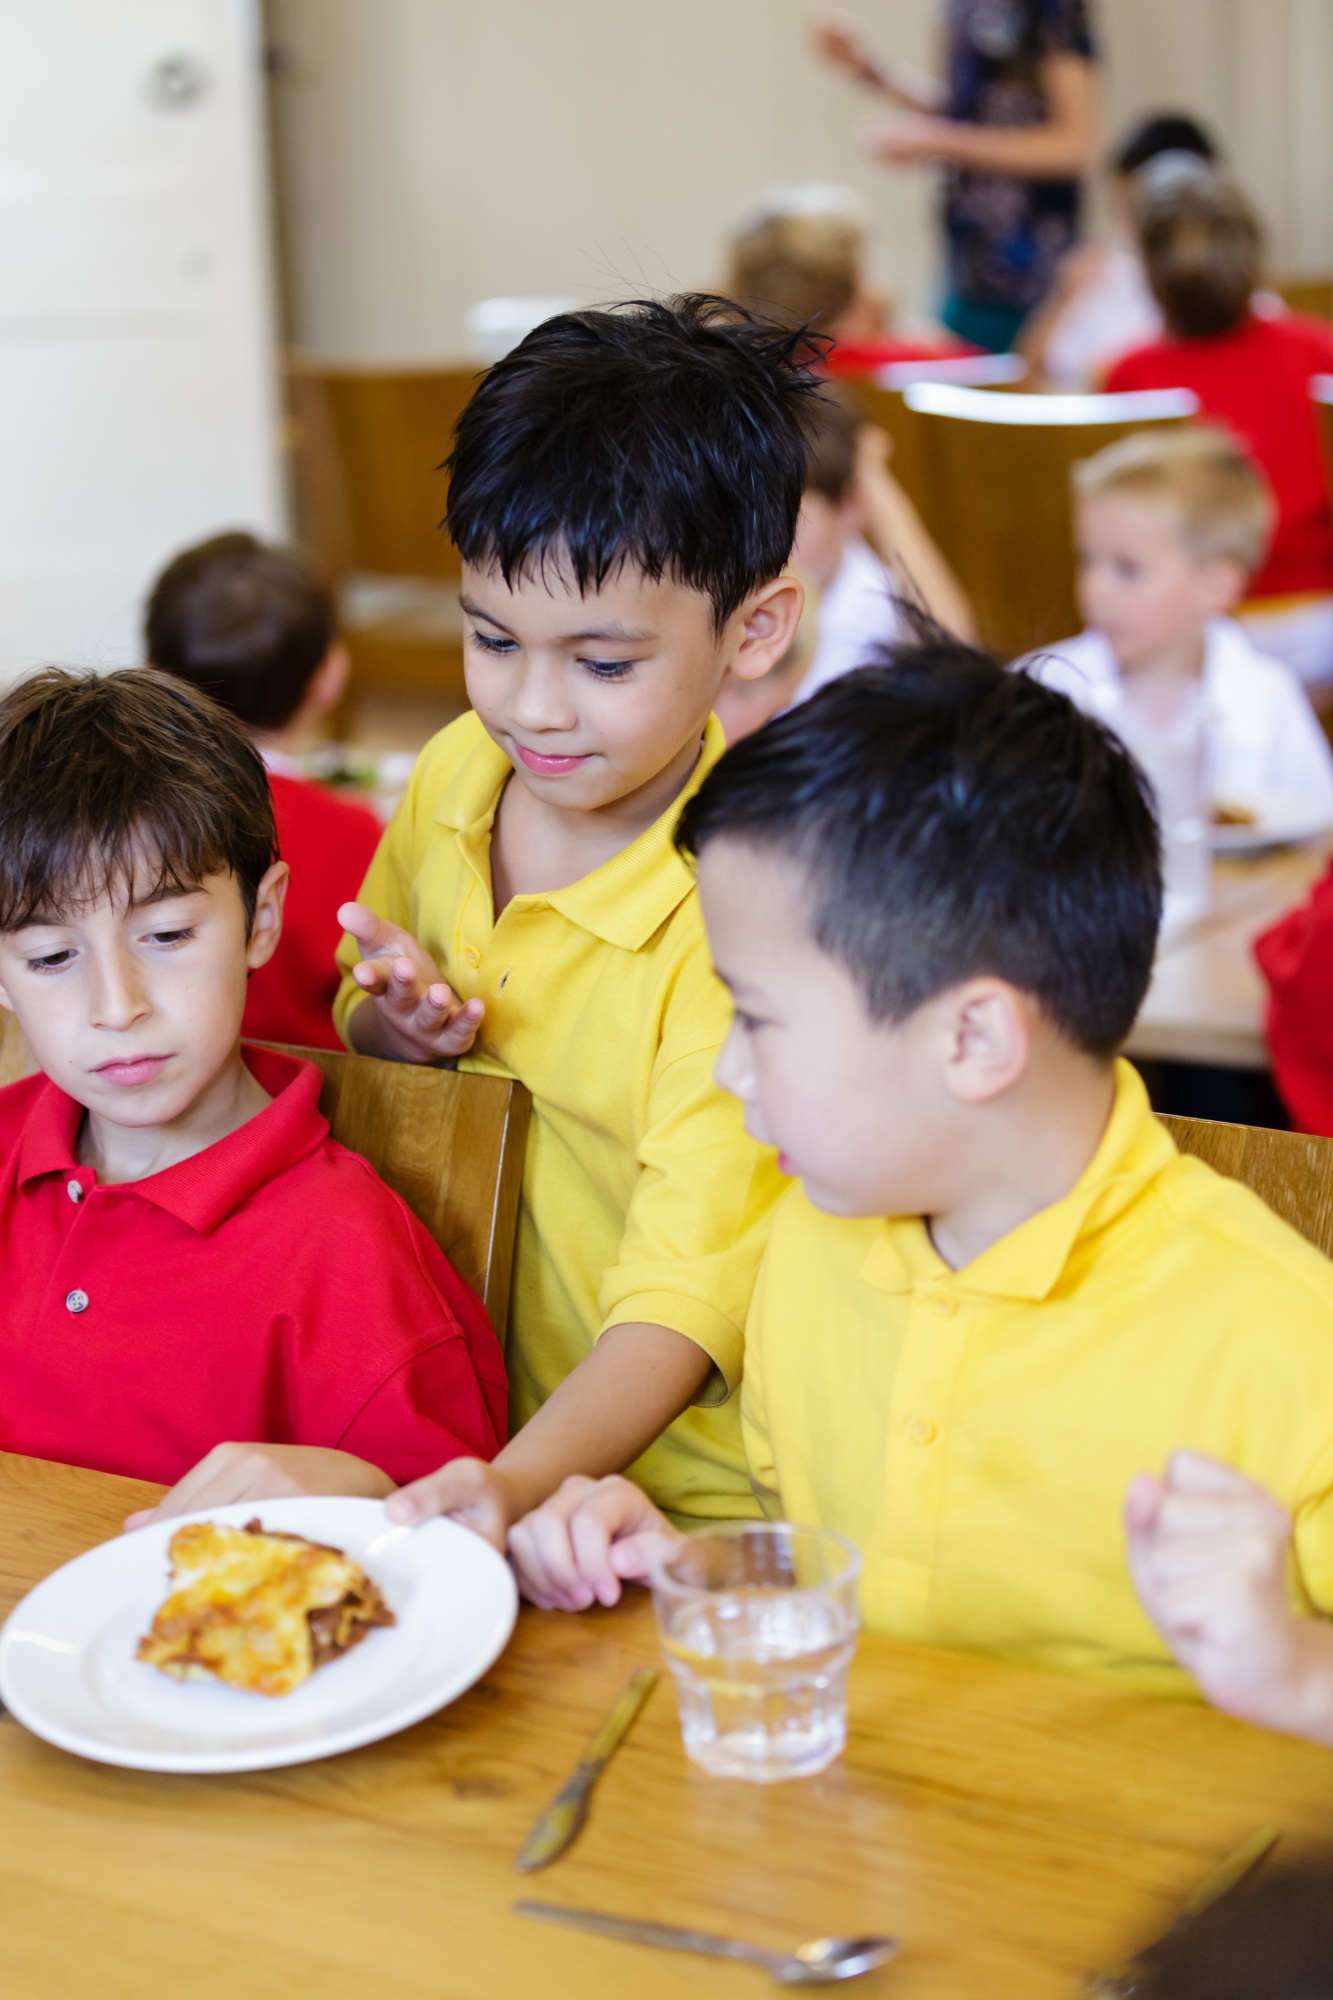 A young boy wearing a bright yellow shirt serving food to two other boys